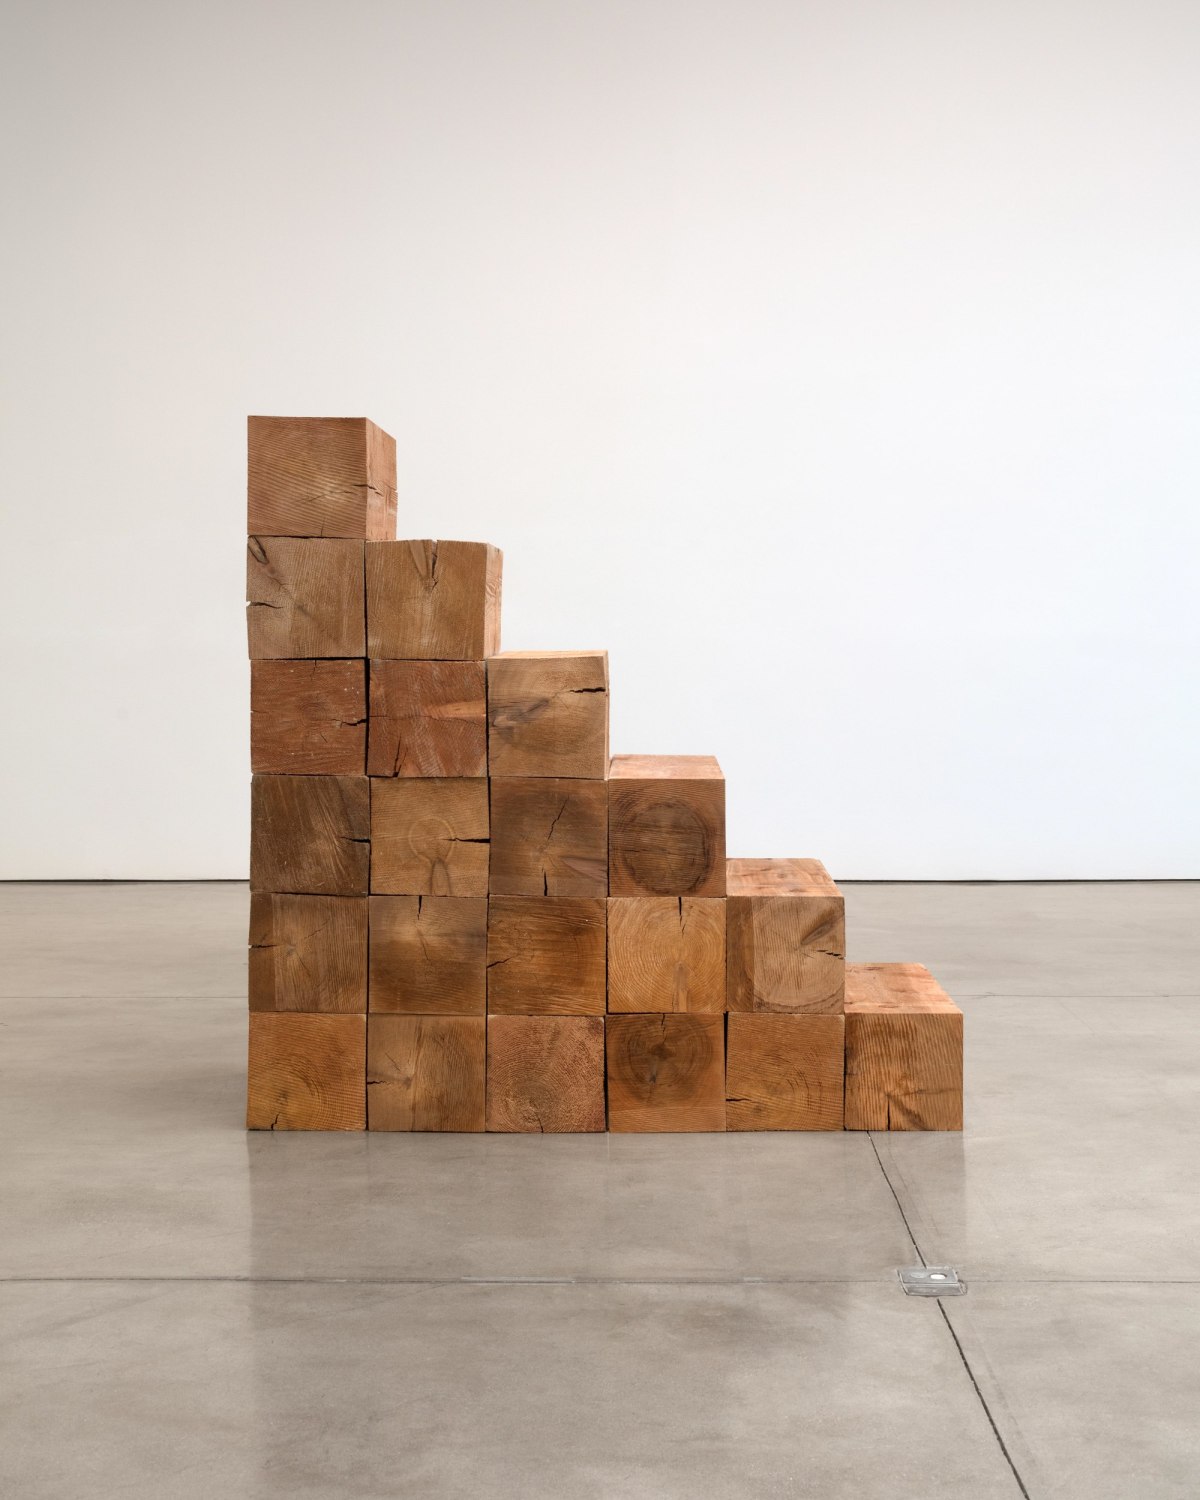 Carl Andre: Between Sculpture and Poetry